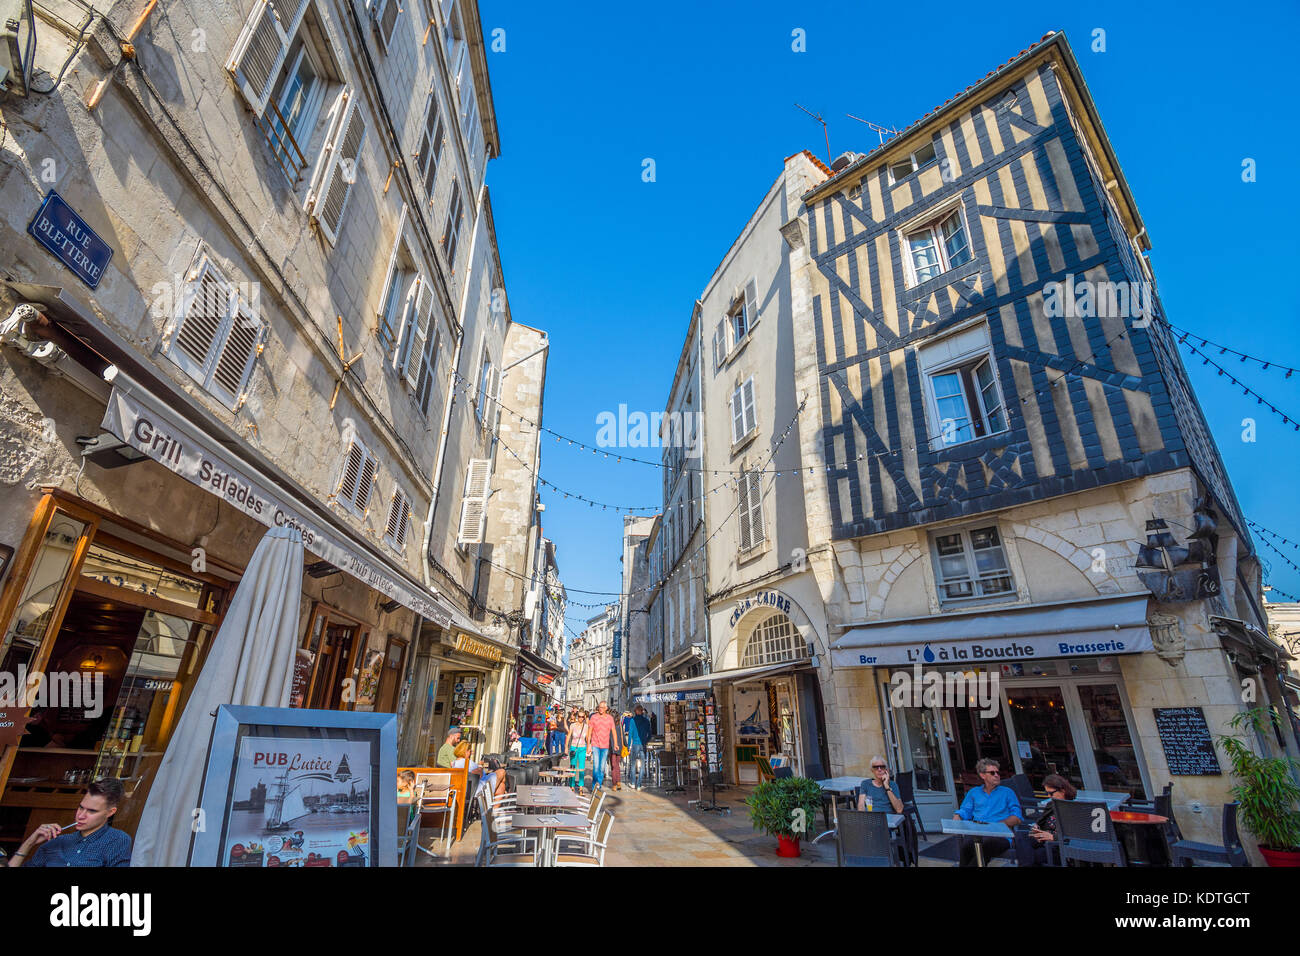 Detail of old buildings with slates protecting timbers from salty air, La Rochelle, France. Stock Photo